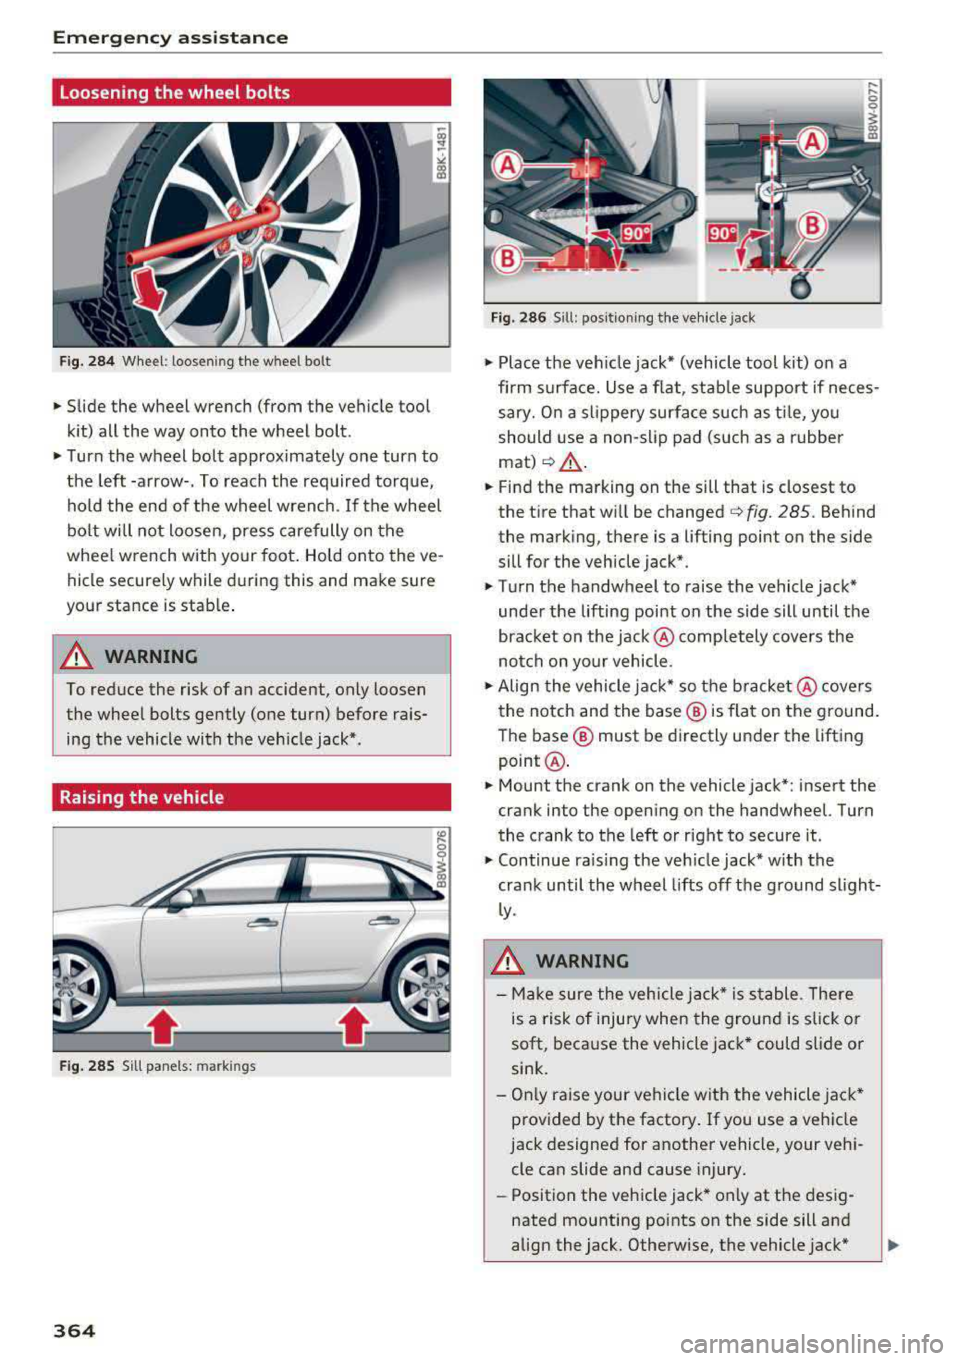 AUDI A4 2018  Owners Manual Emergency assistance 
Loosening the  wheel  bolts 
Fig.  284 Wheel:  loosening  the  wheel  bolt 
• Slide  the  wheel  wrench  (from  the  vehicle  tool  
kit)  all the  way  onto  the  wheel  bolt.